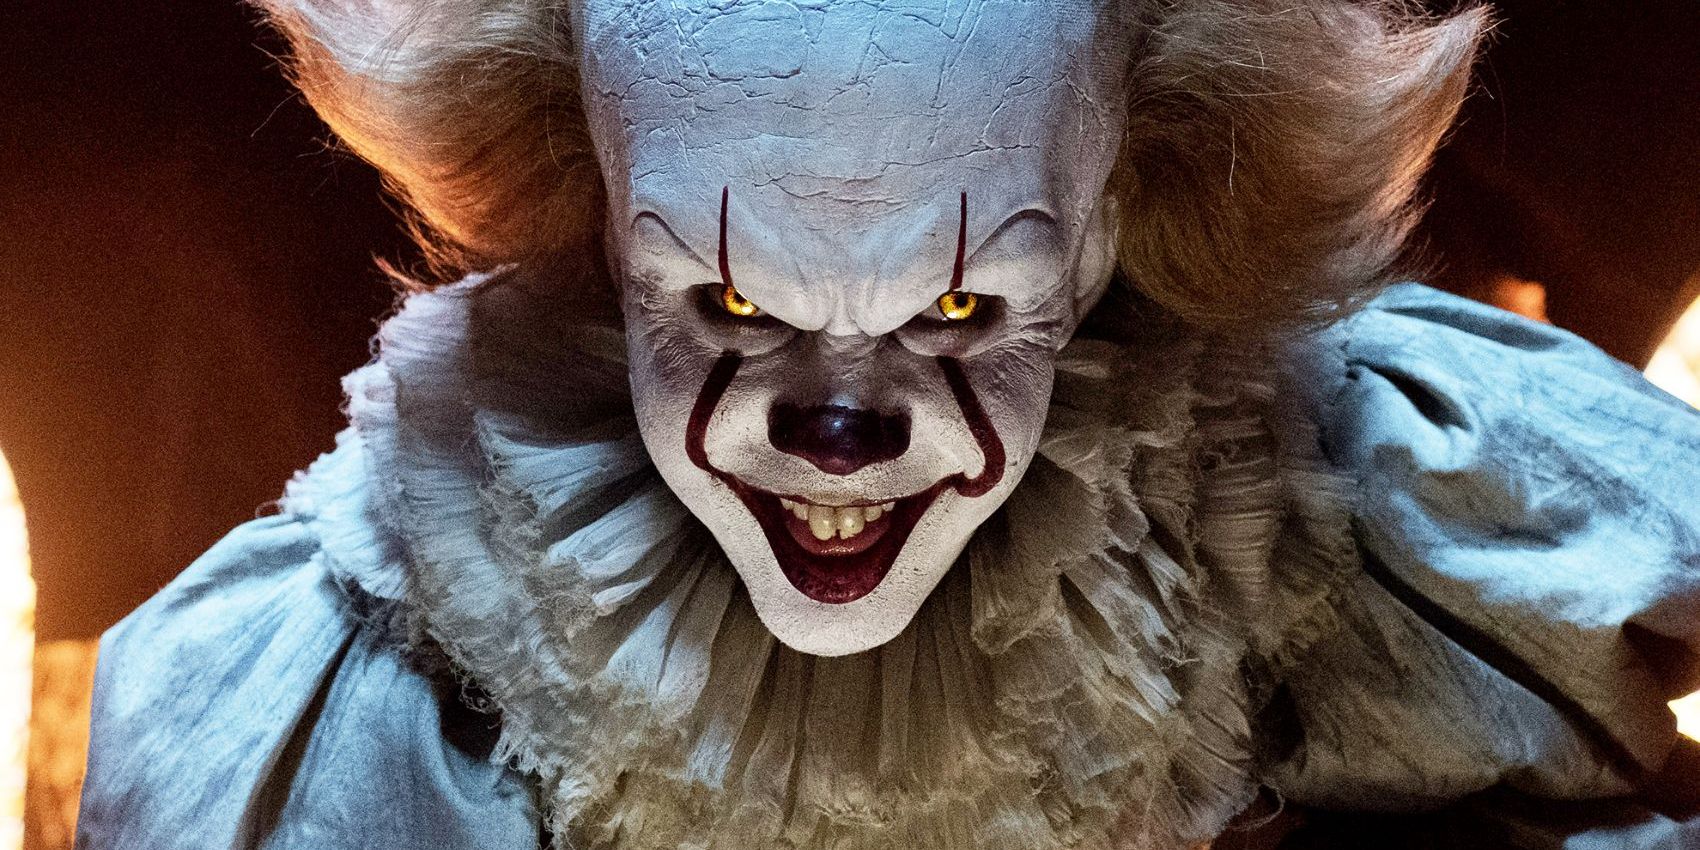 Pennywise smiling intensely in It.